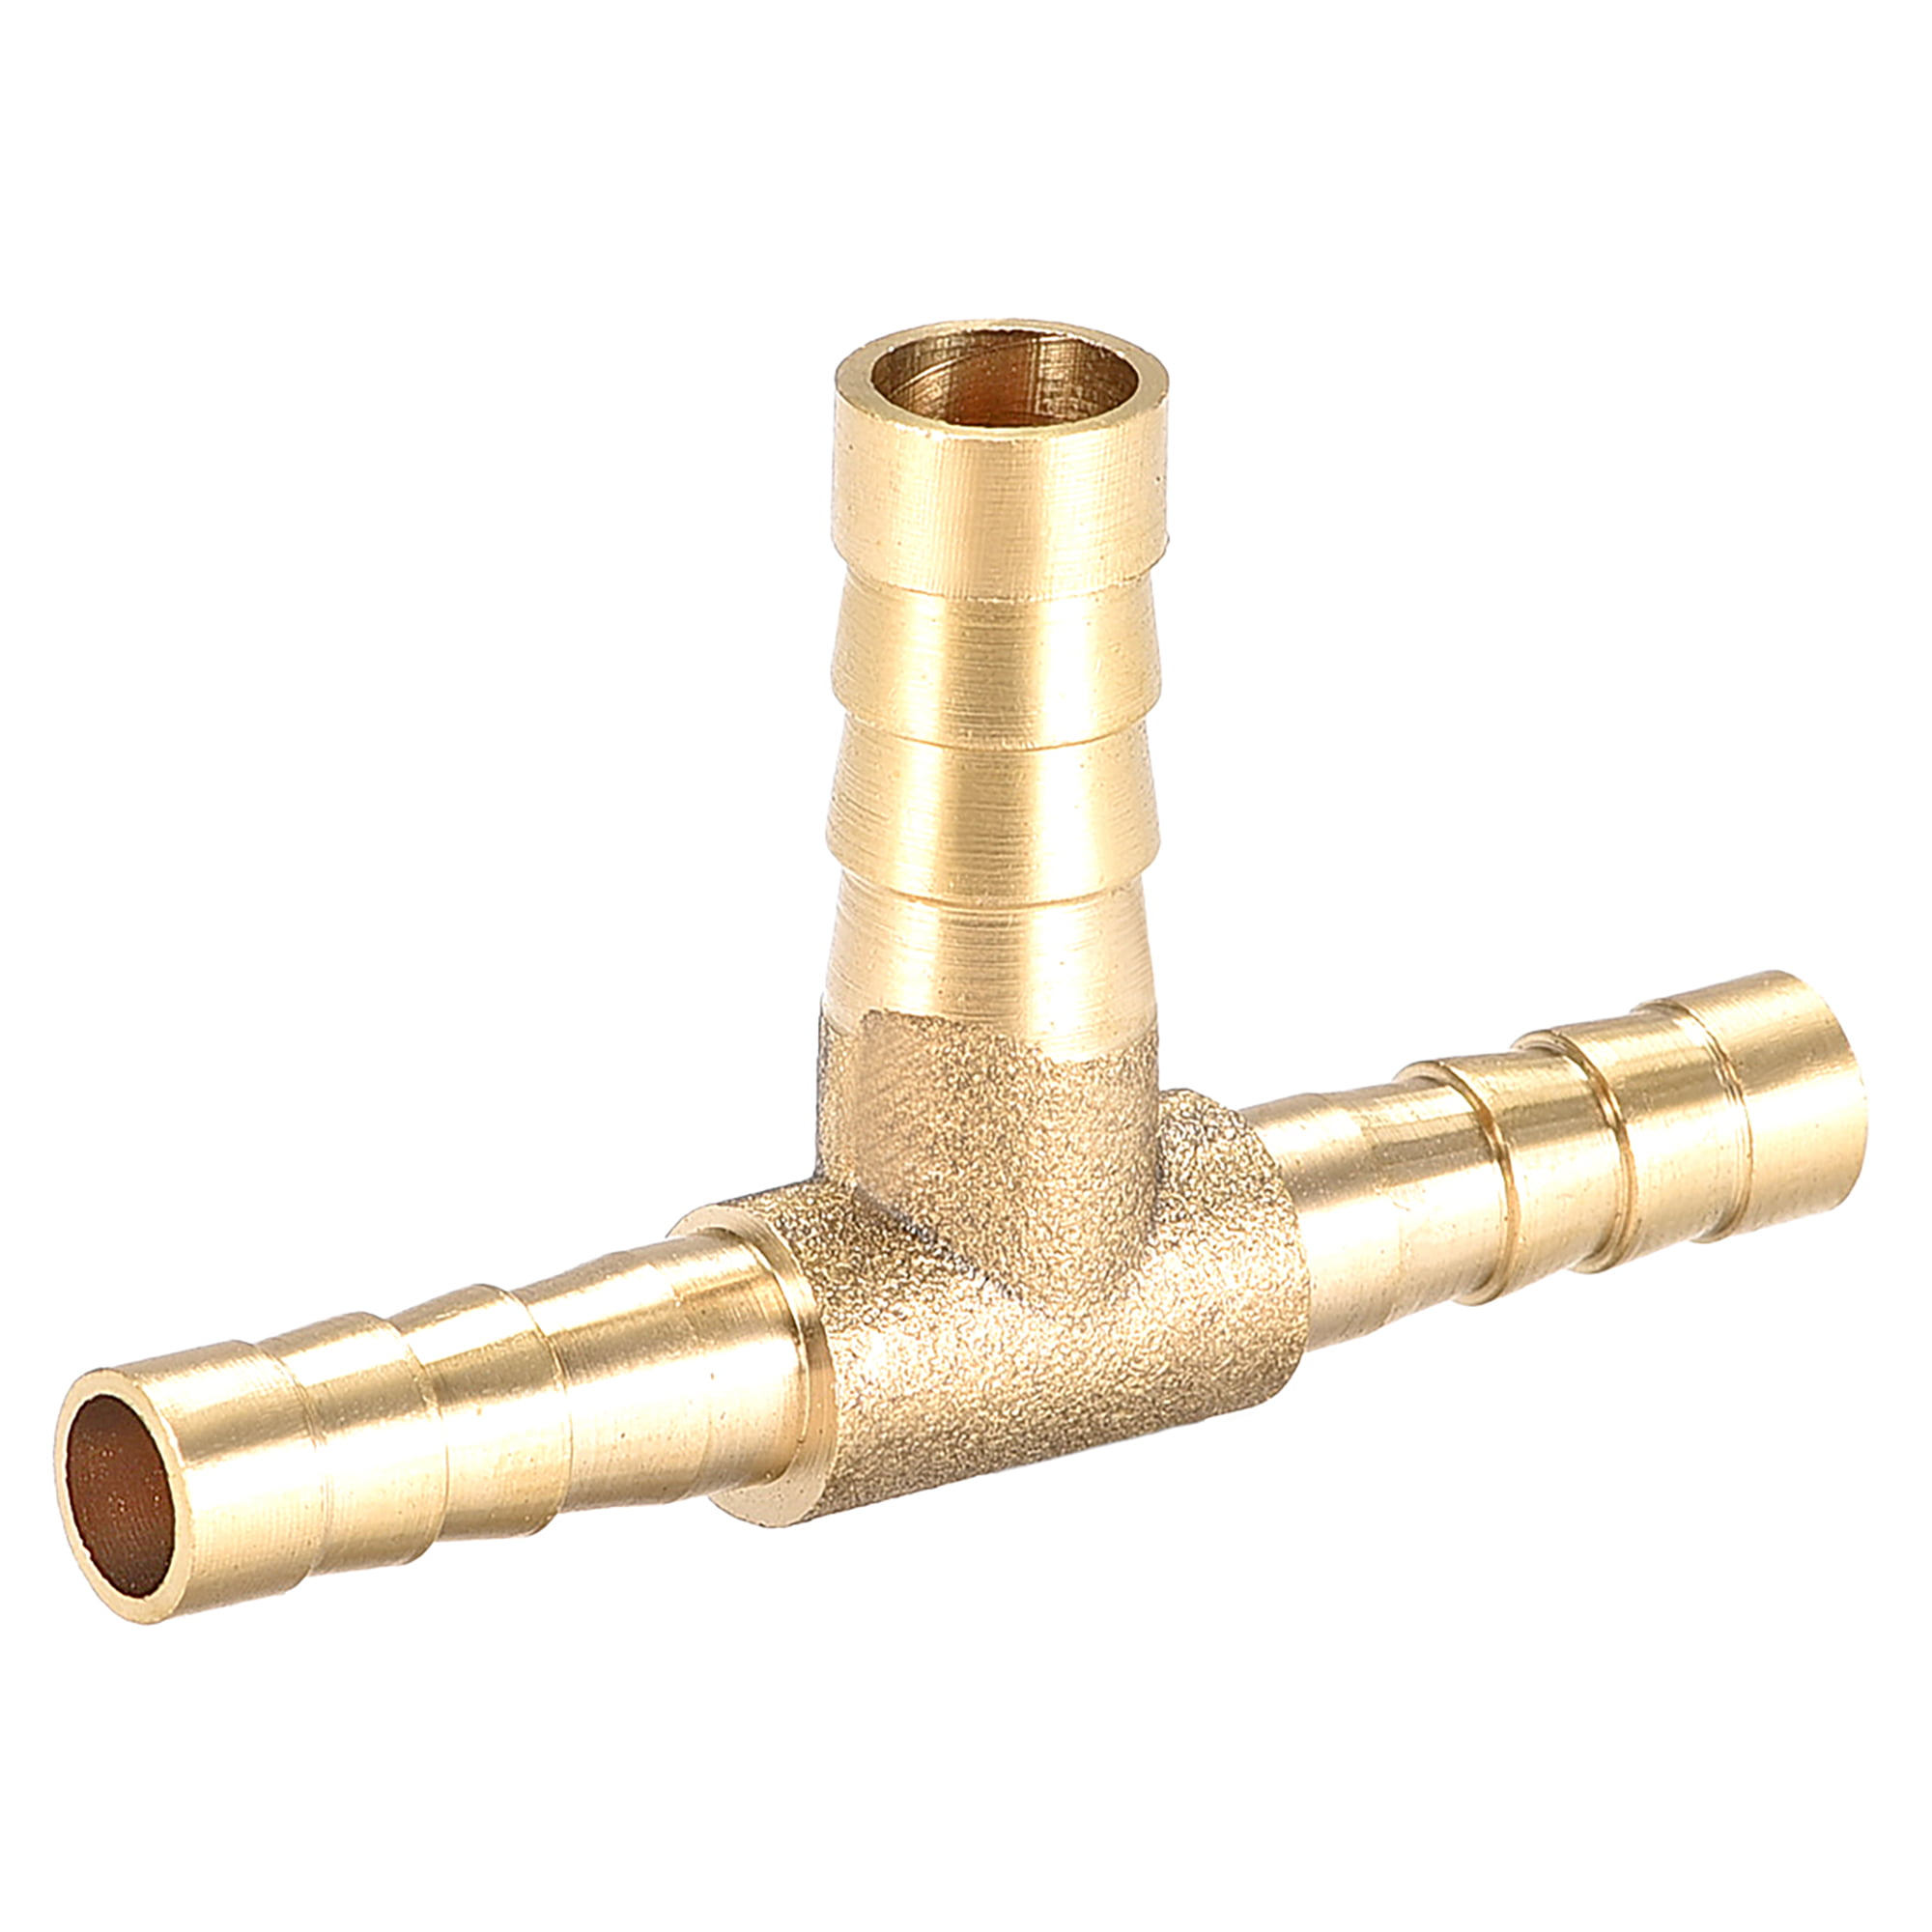 uxcell 8mm X 5mm X 8mm Brass Hose Reducer Barb Fitting Tee T-Shaped 3 Way Barbed Connector Air Water Fuel Gas 